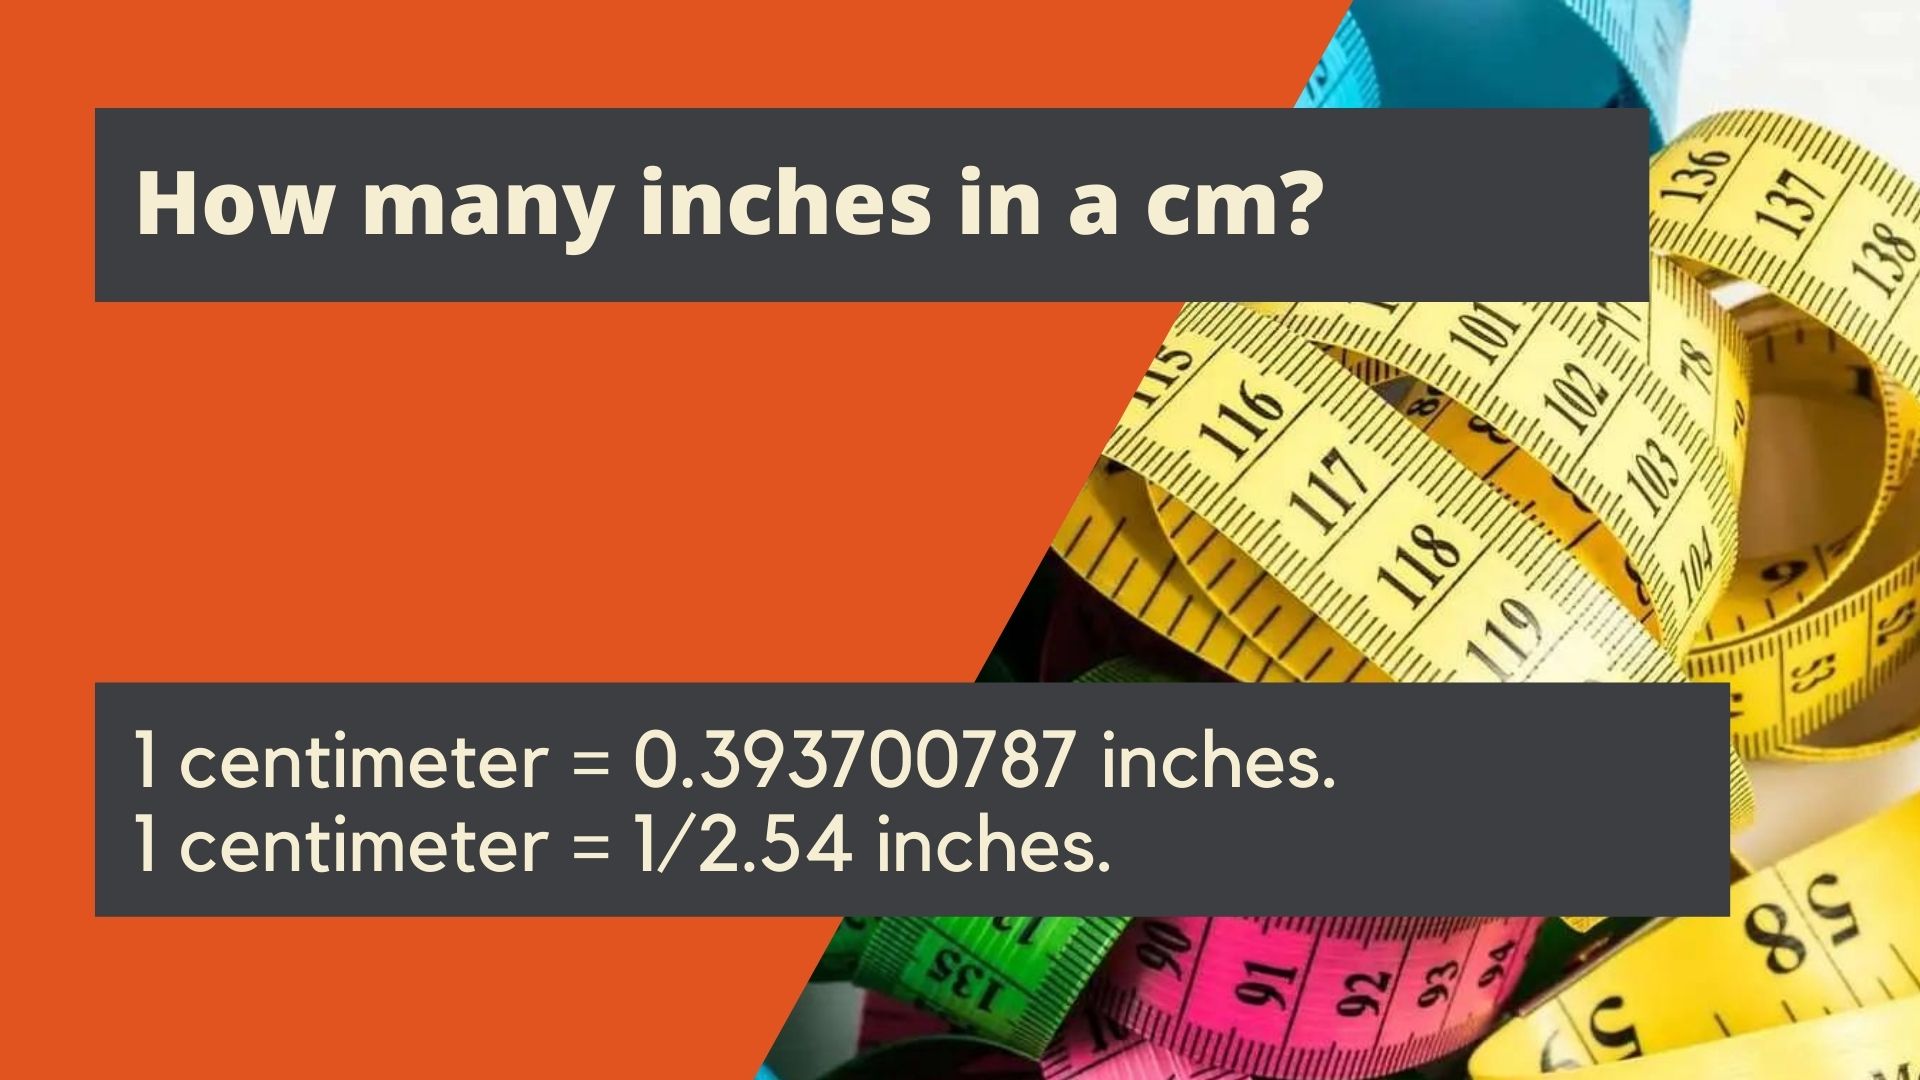 How many inches in a cm?